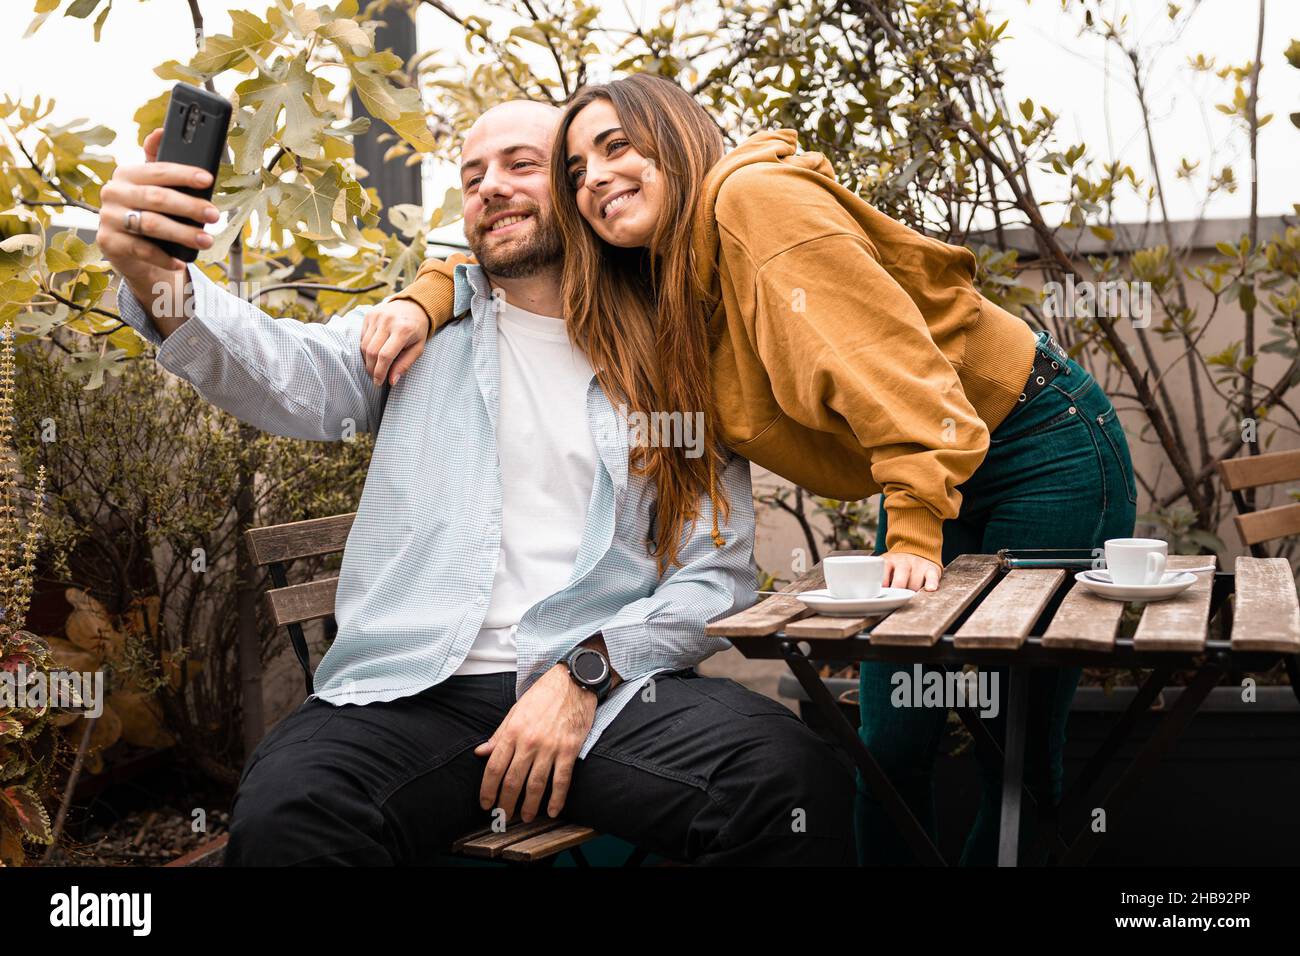 Couple of young people taking selfies in the terrace Stock Photo